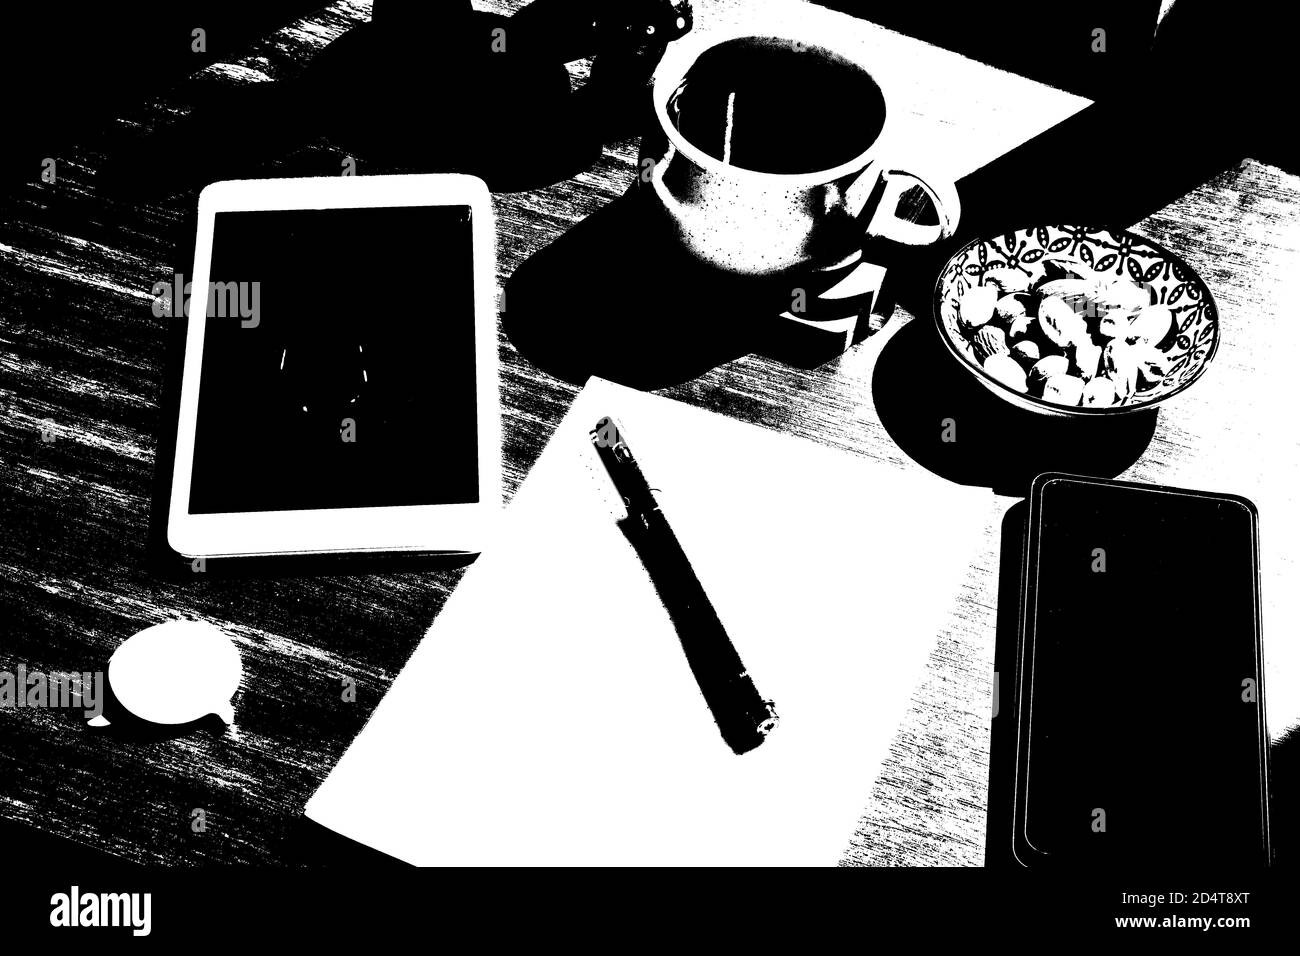 Working from home, workspace with notebook and laptop, coffee and plants, workplace. Paper and pen. Stock Photo